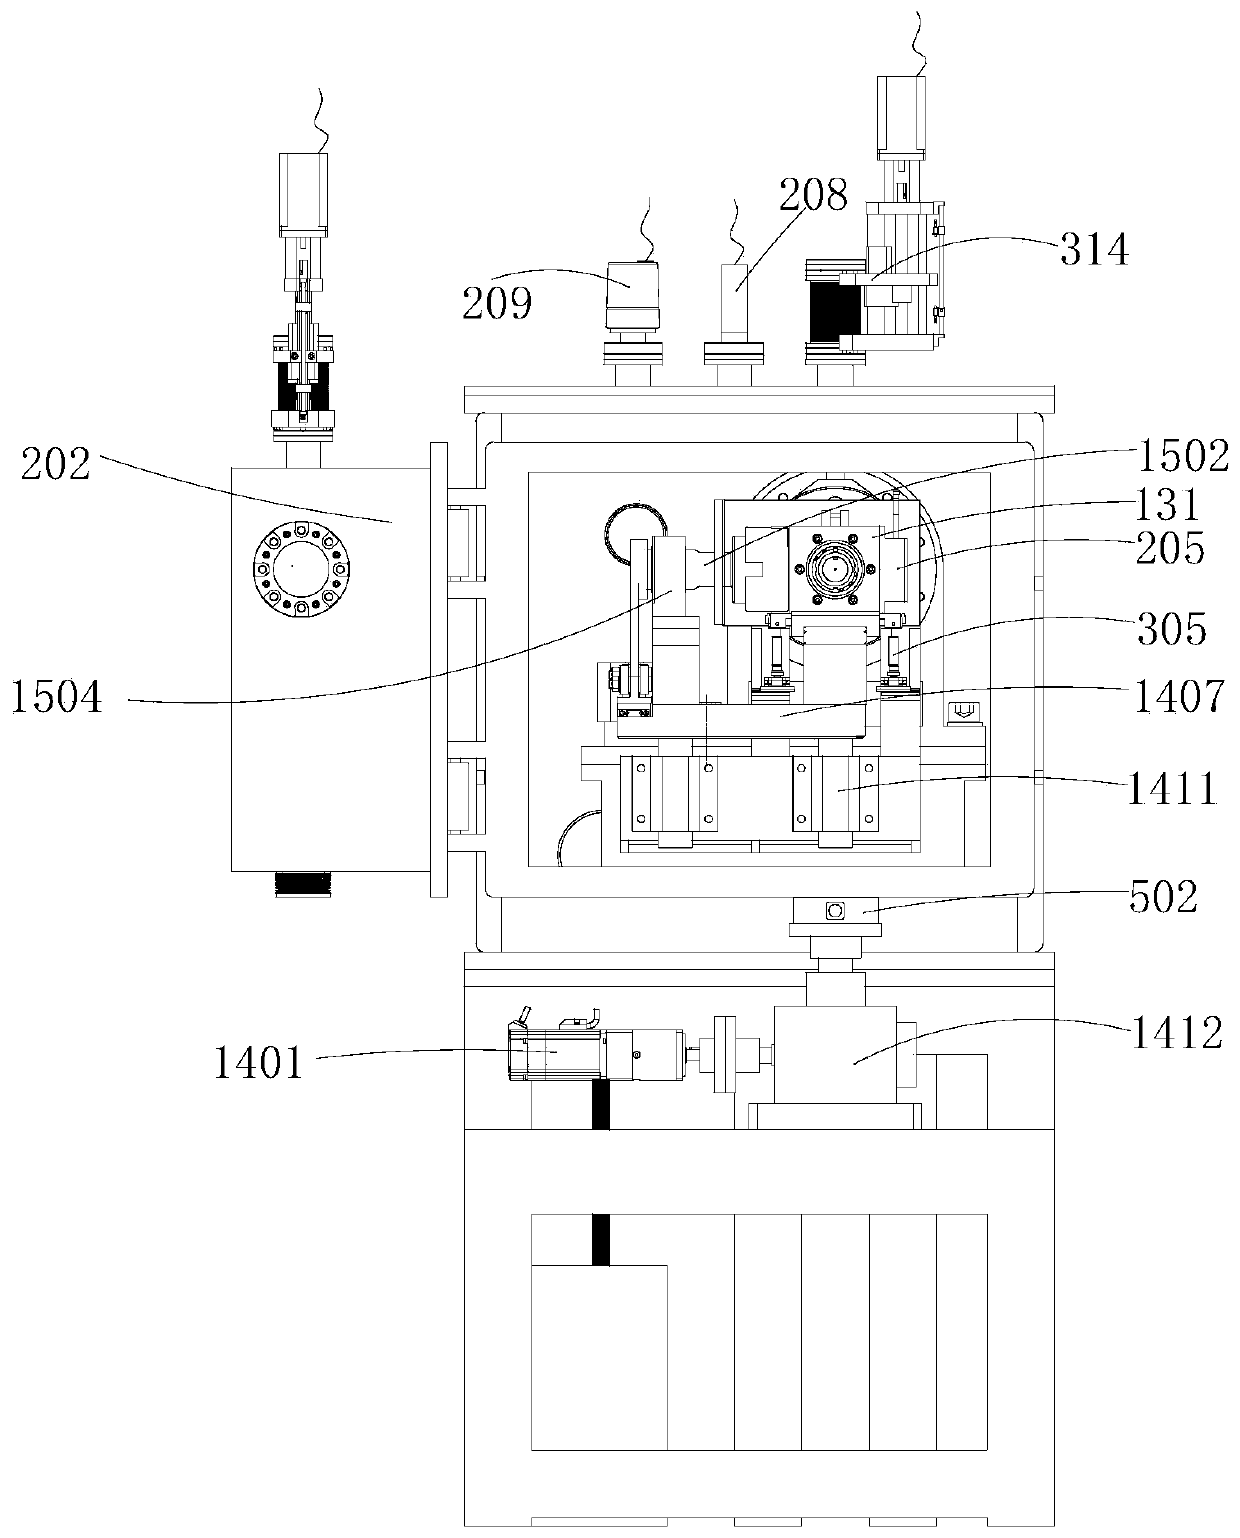 Low-temperature great-temperature-change joint bearing test platform and movement and load simulation system